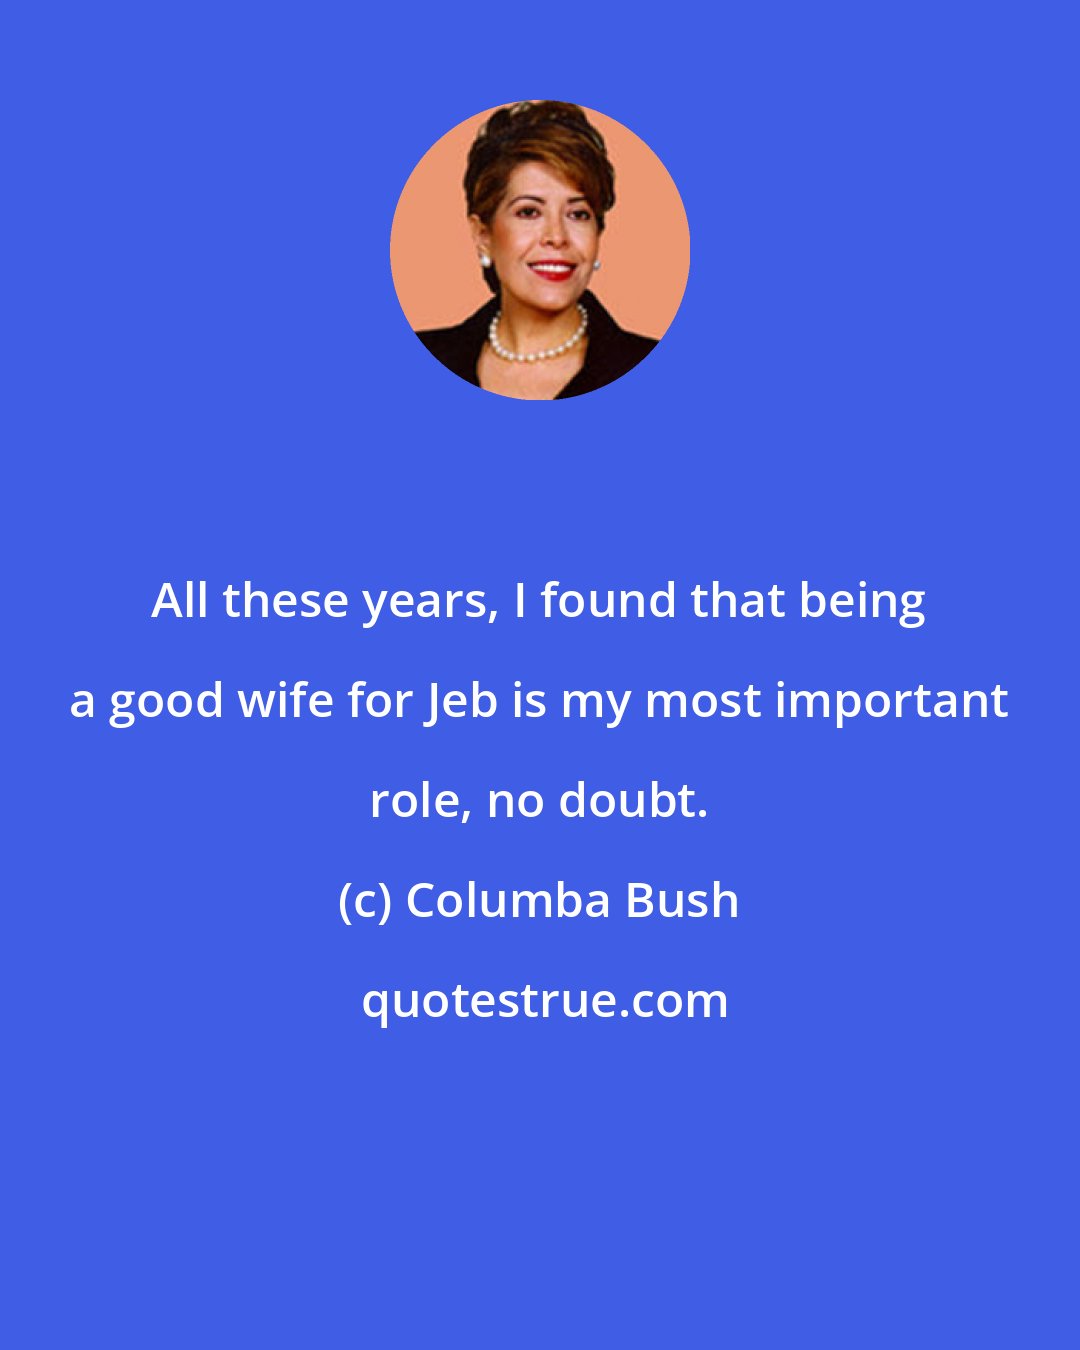 Columba Bush: All these years, I found that being a good wife for Jeb is my most important role, no doubt.